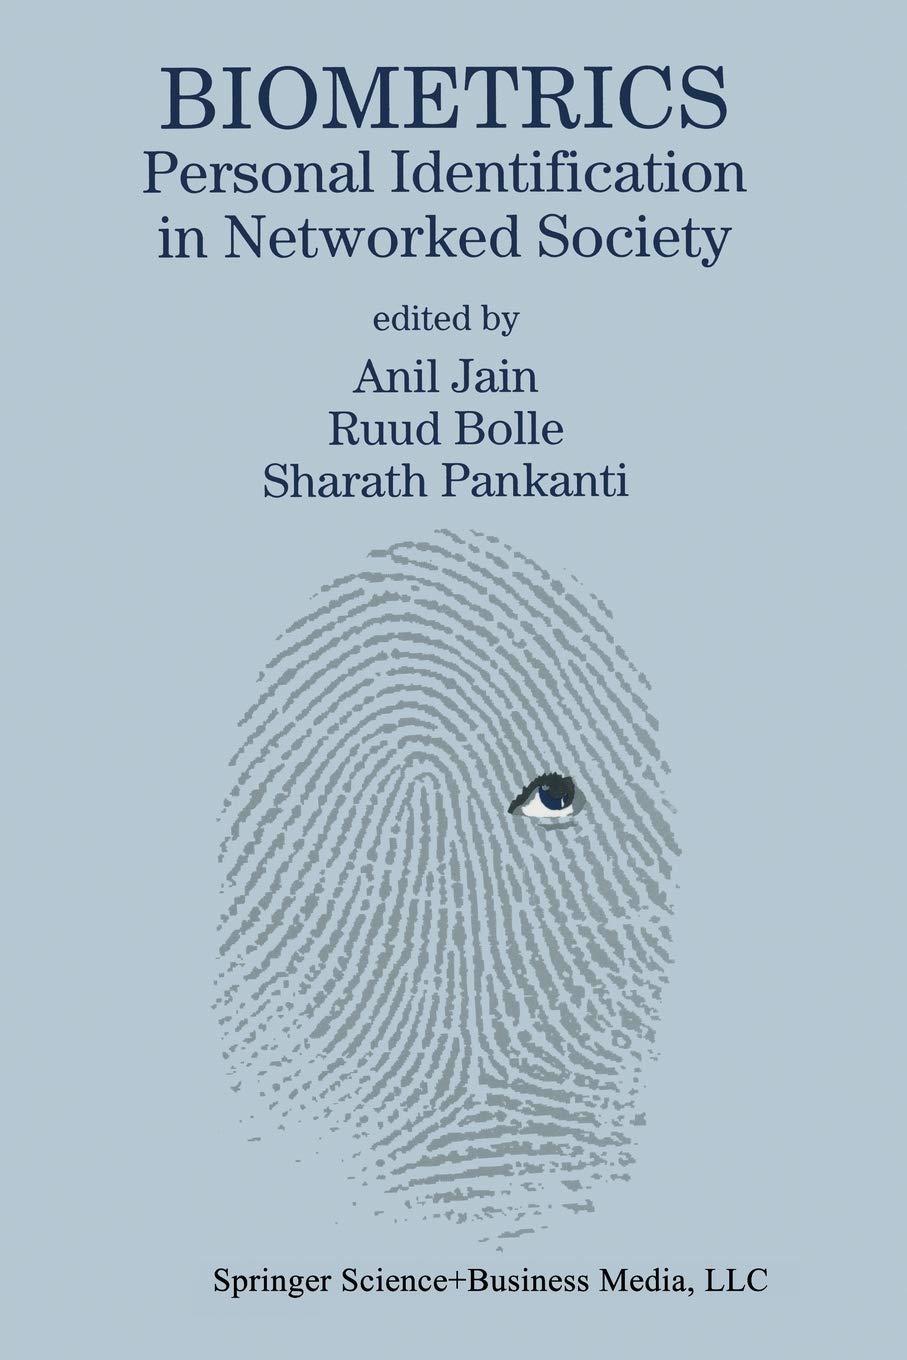 biometrics personal identification in networked society 1996 edition anil k. jain, ruud bolle, sharath